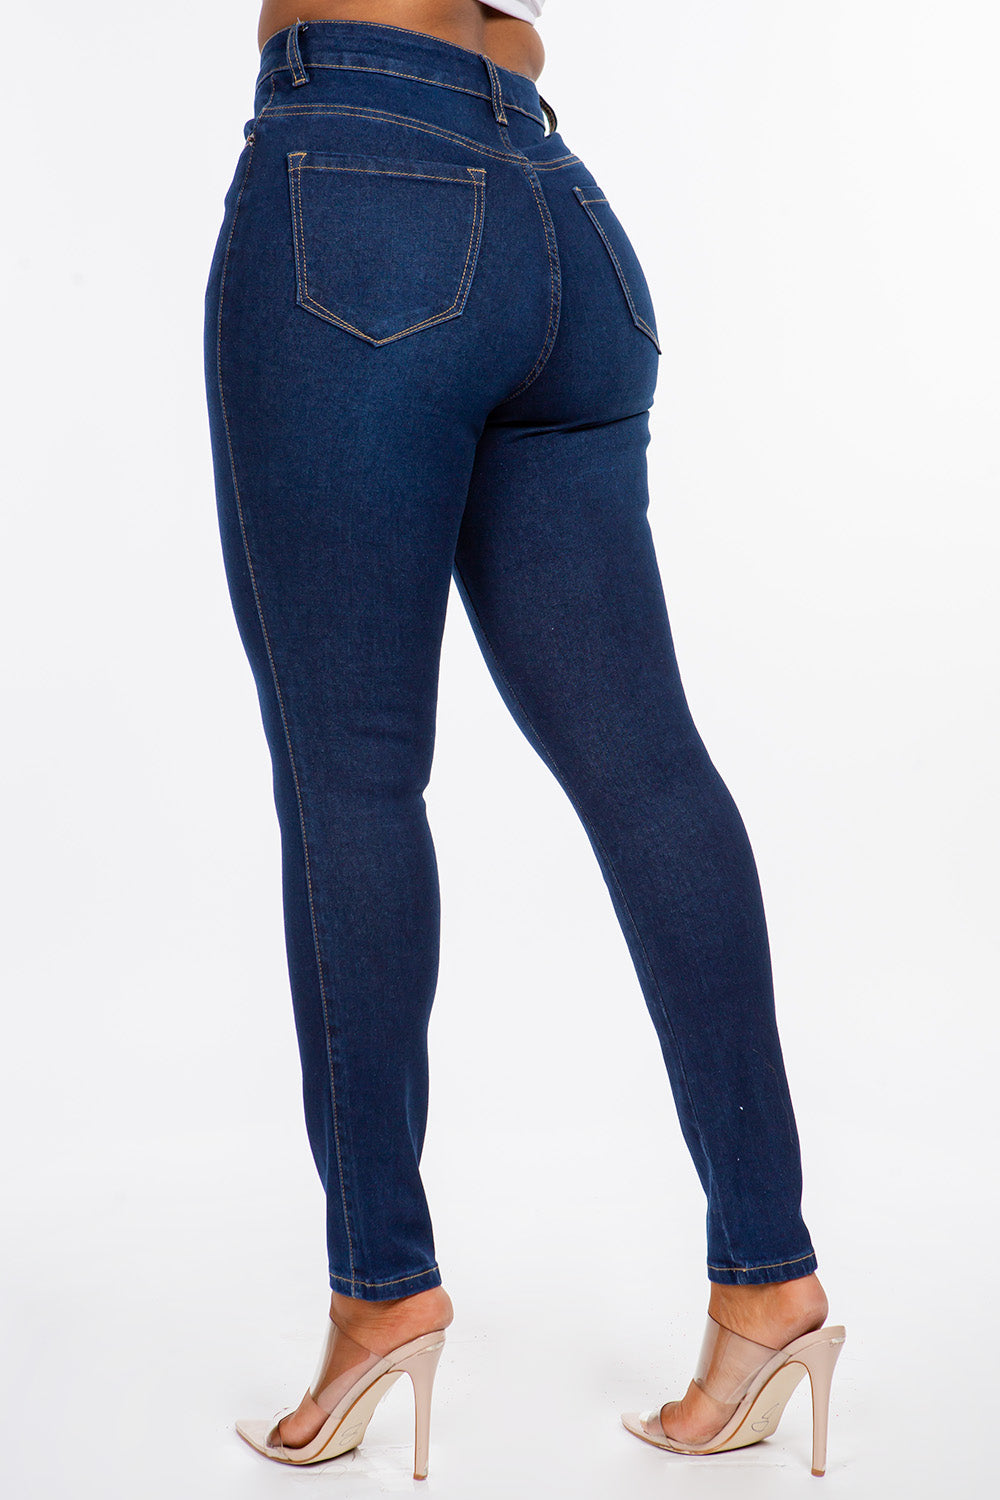 Wholesale NEW Classic High Skinny Jean Blue Jeans – BLUE